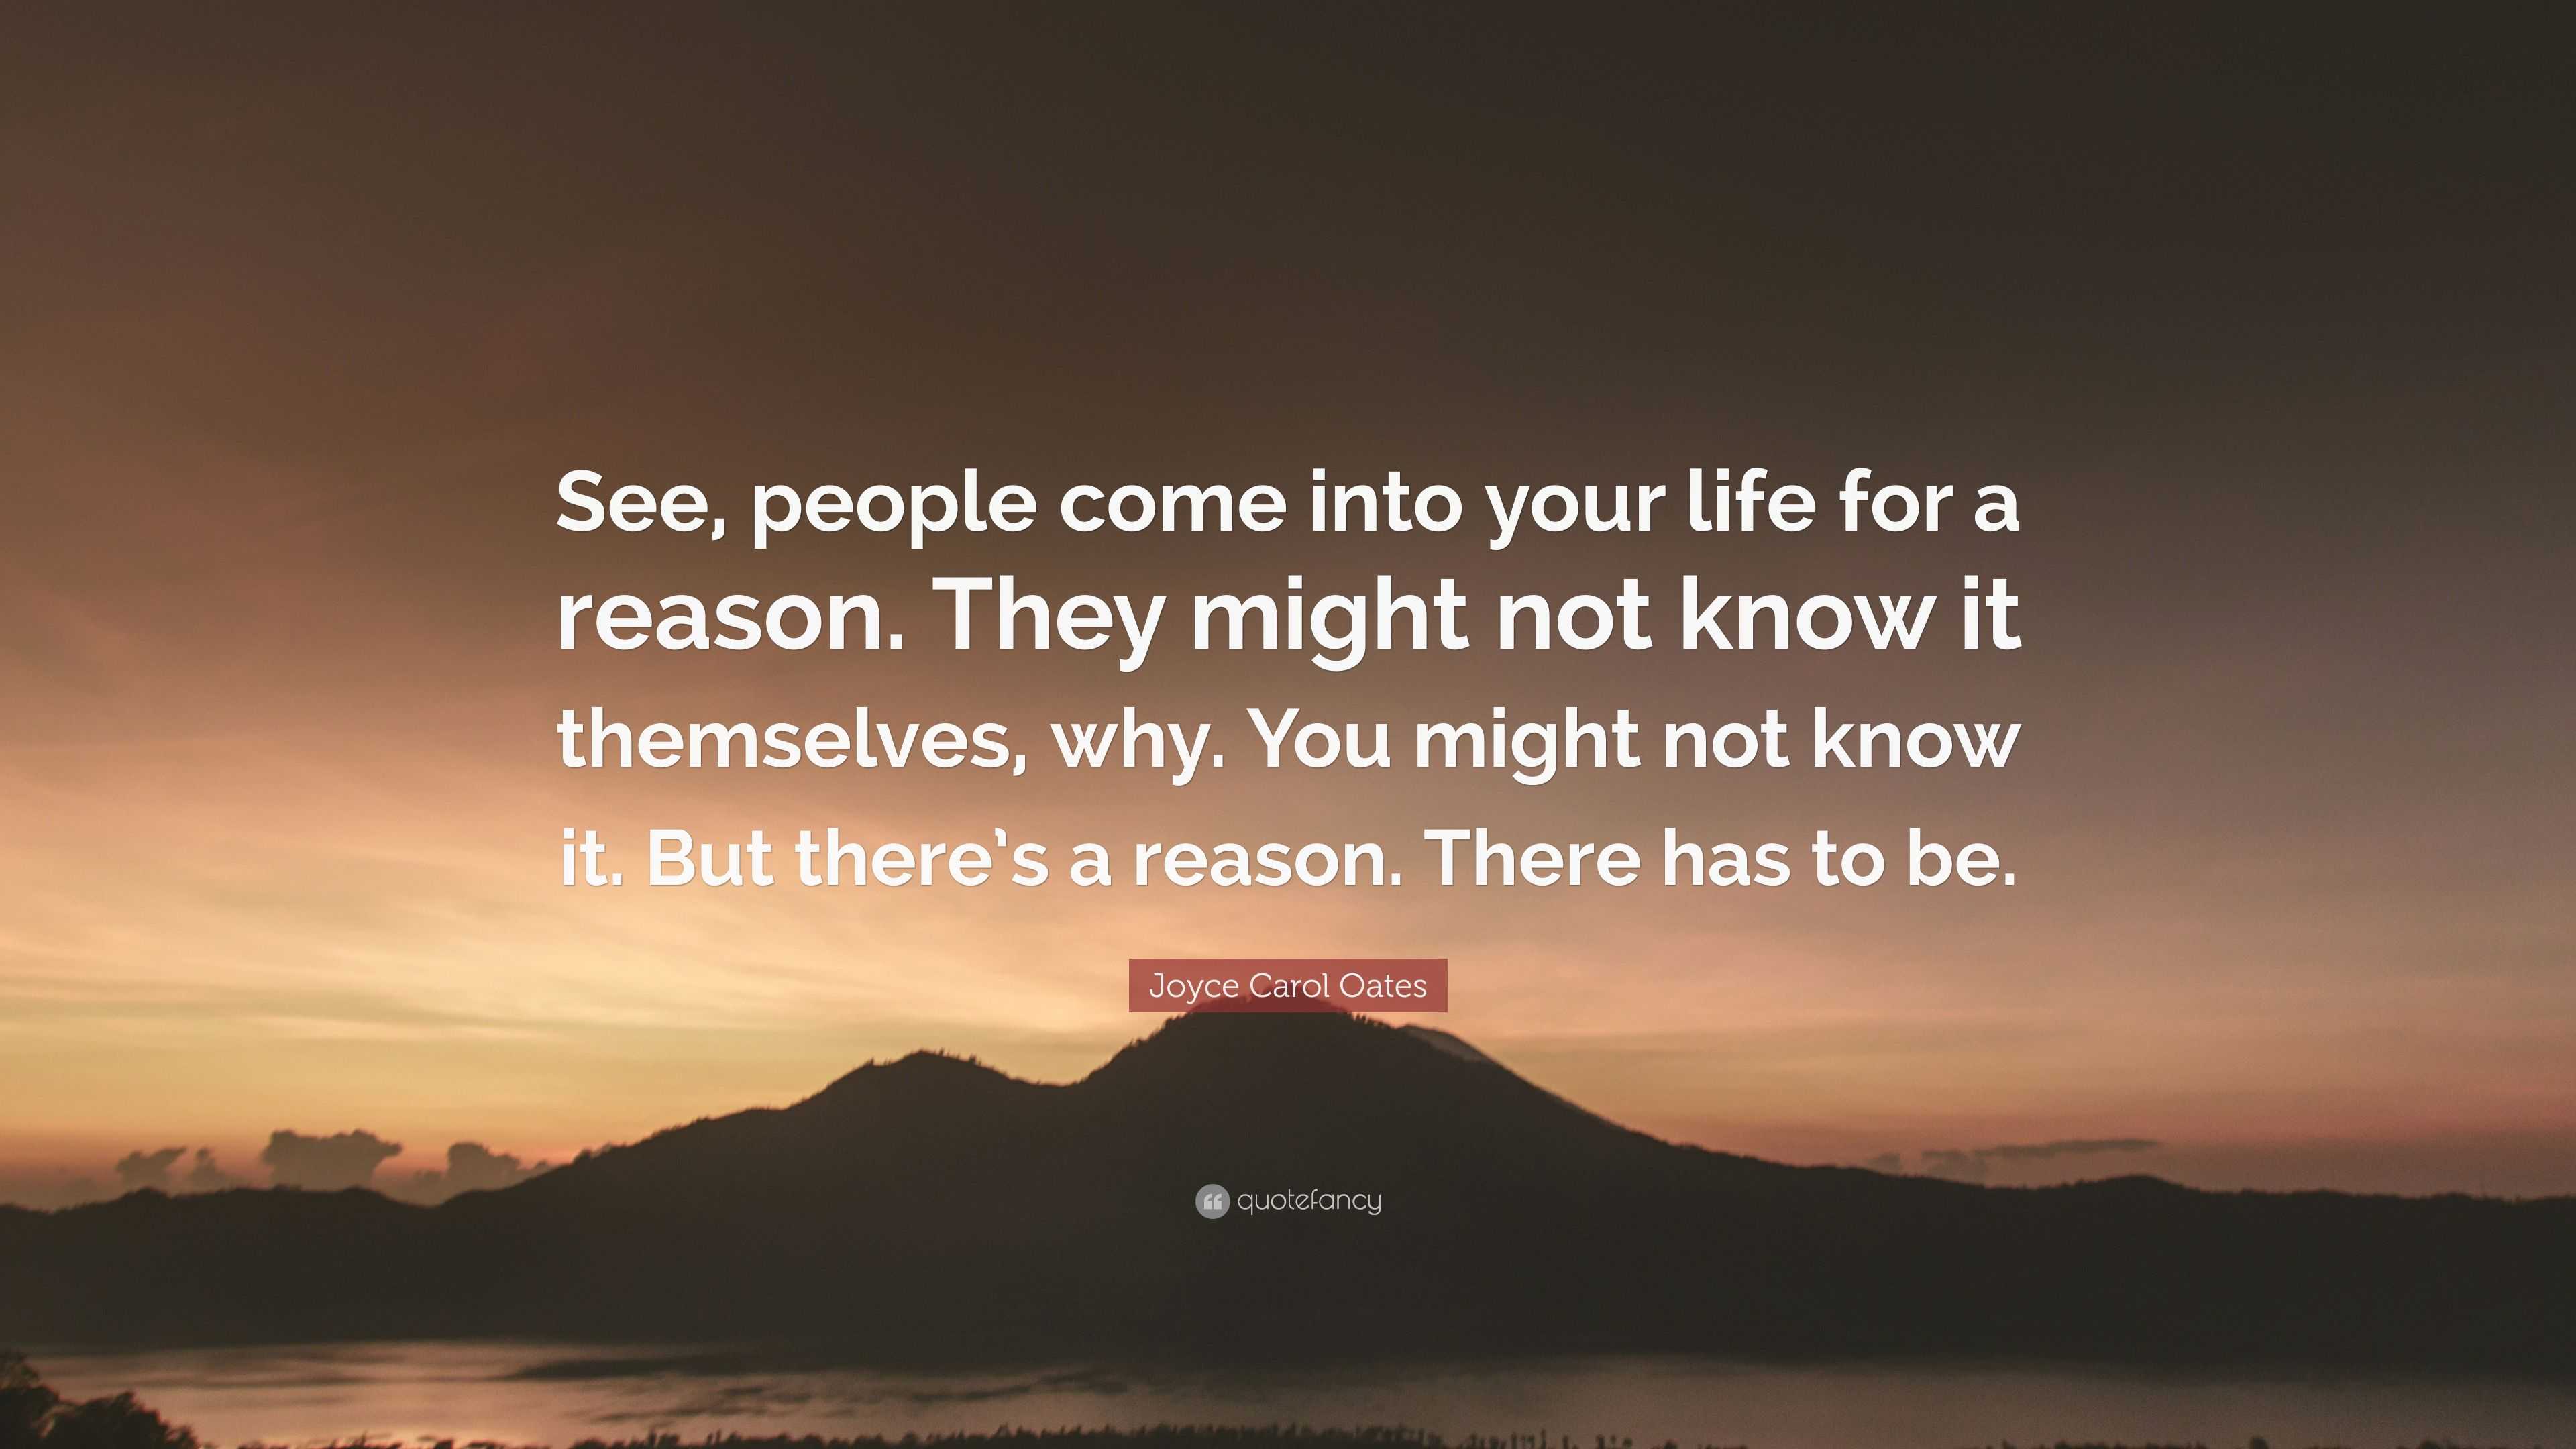 people are in your life for a reason quotes Famous people are in your life for a reason quotes Popular people are in your life for a reason quotes